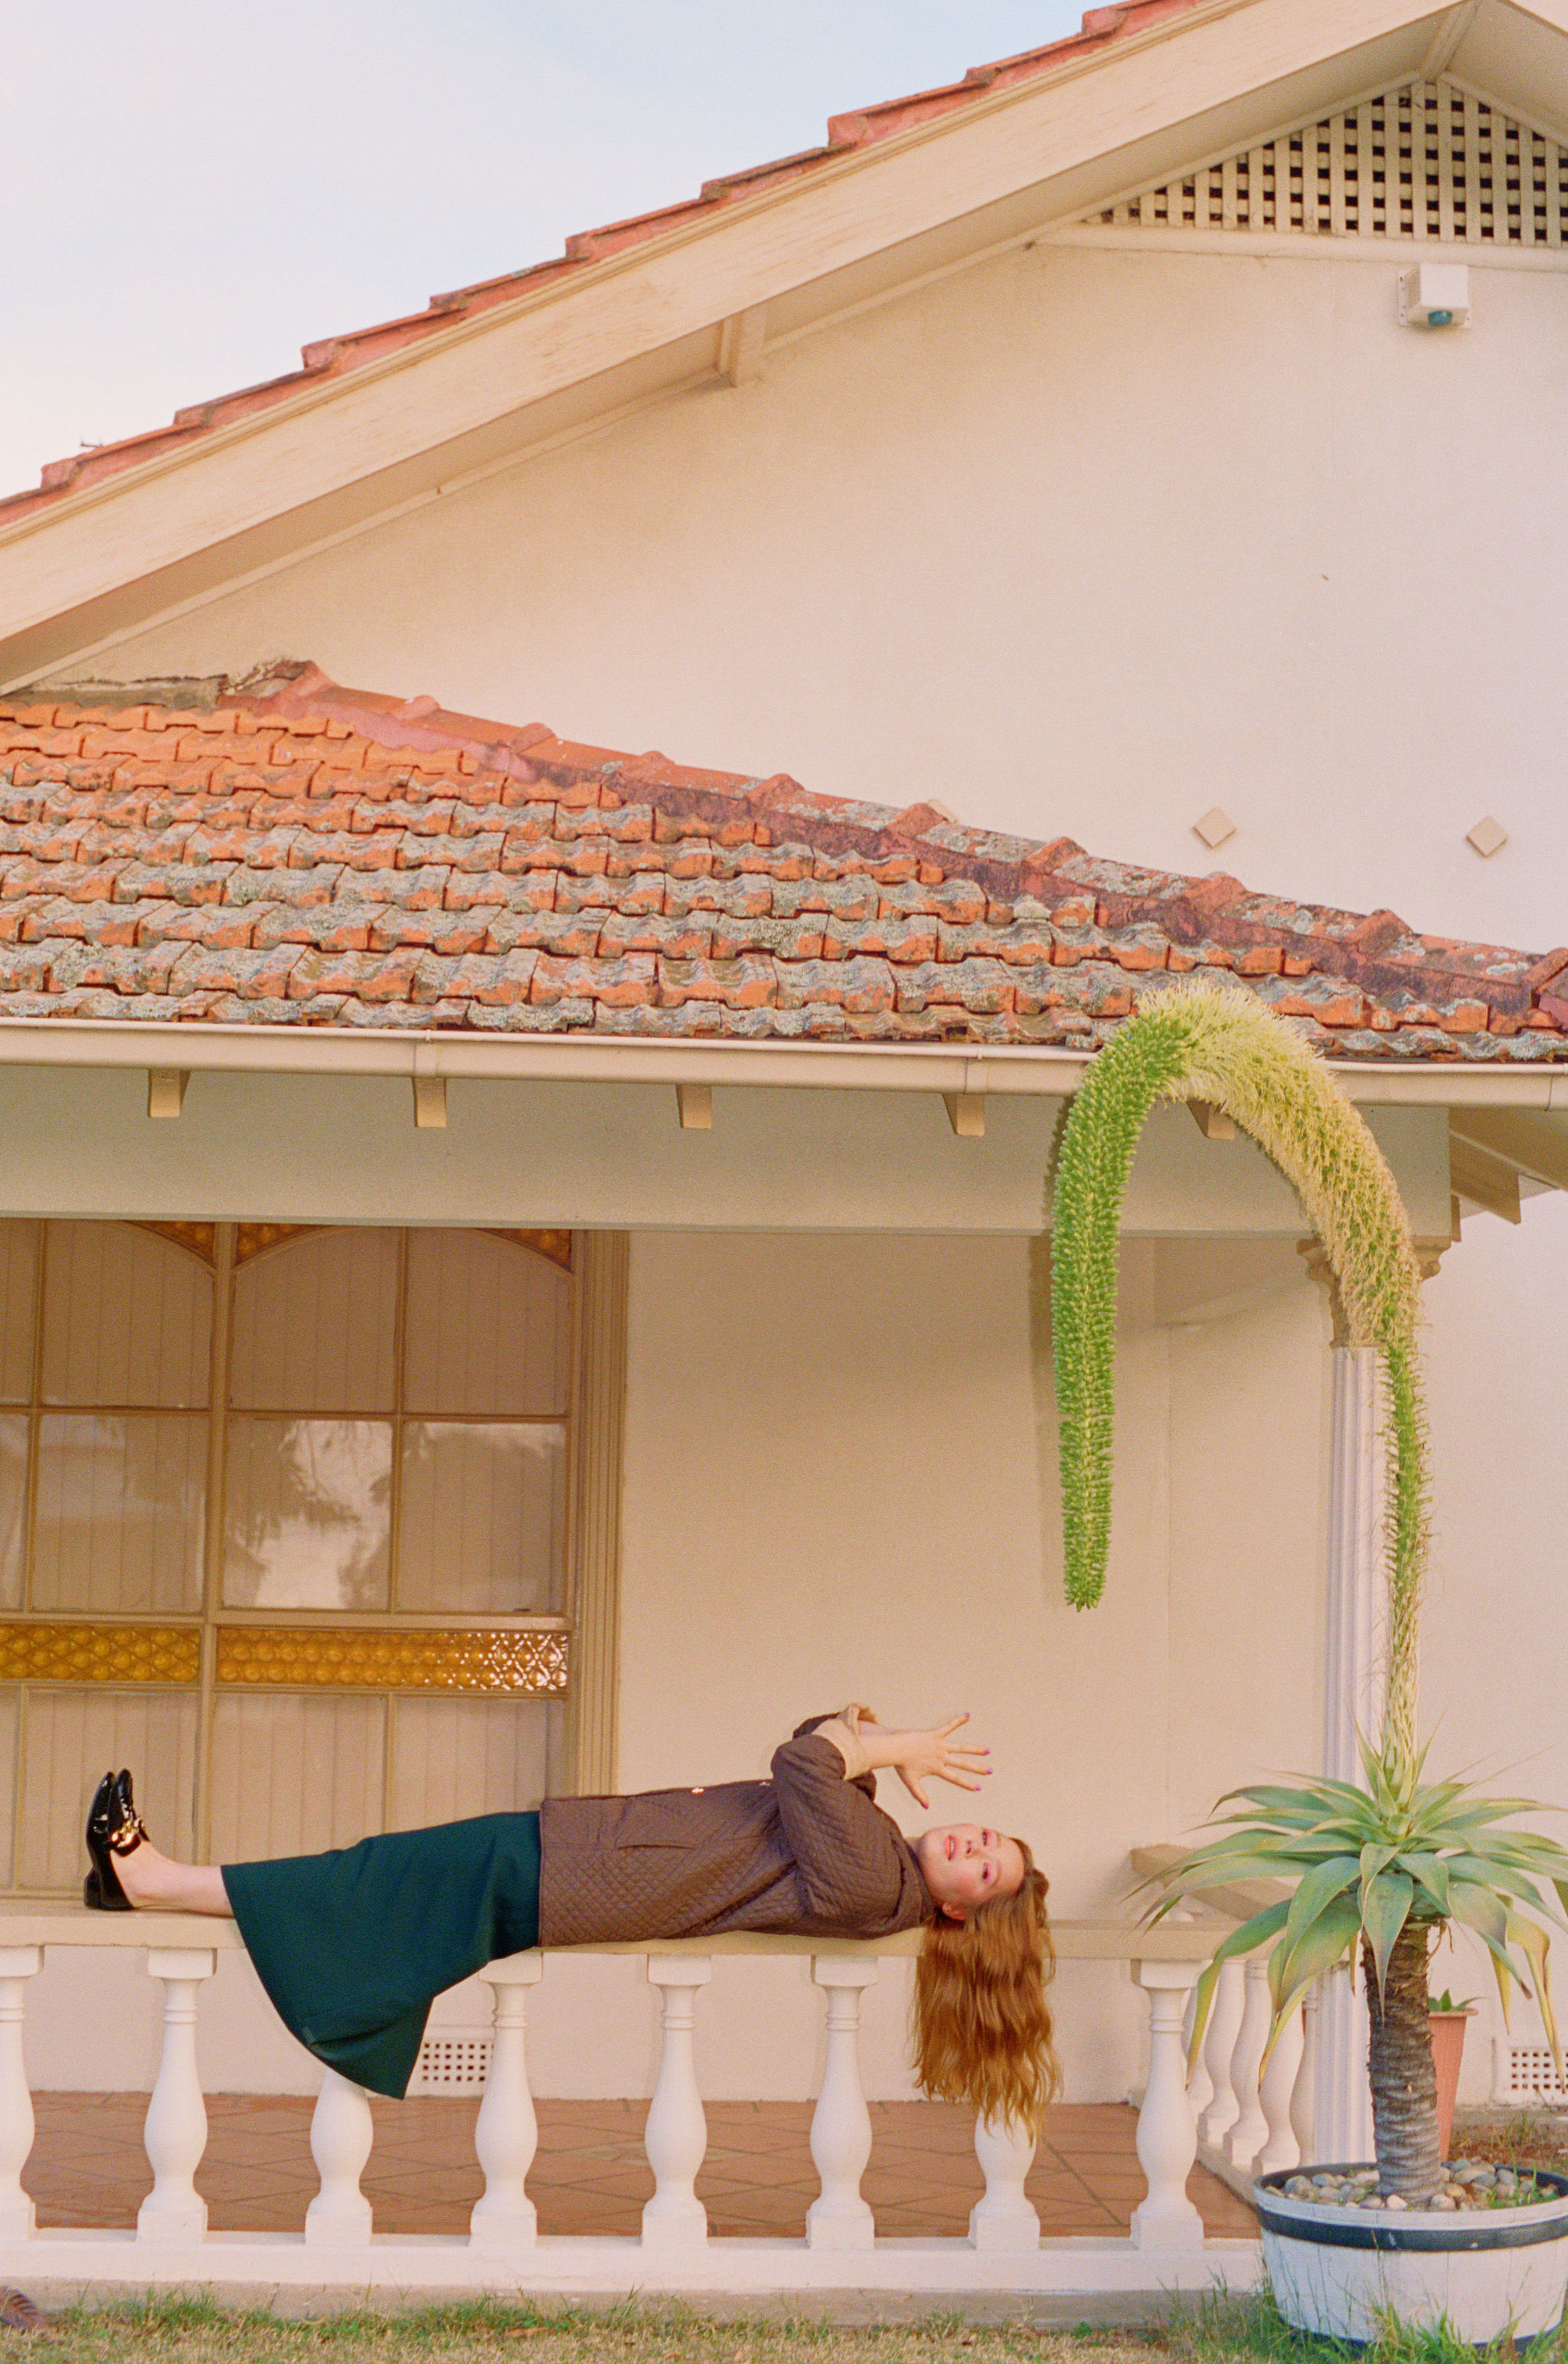 julia jacklin lying on her porch with her hands outstretched in prayer